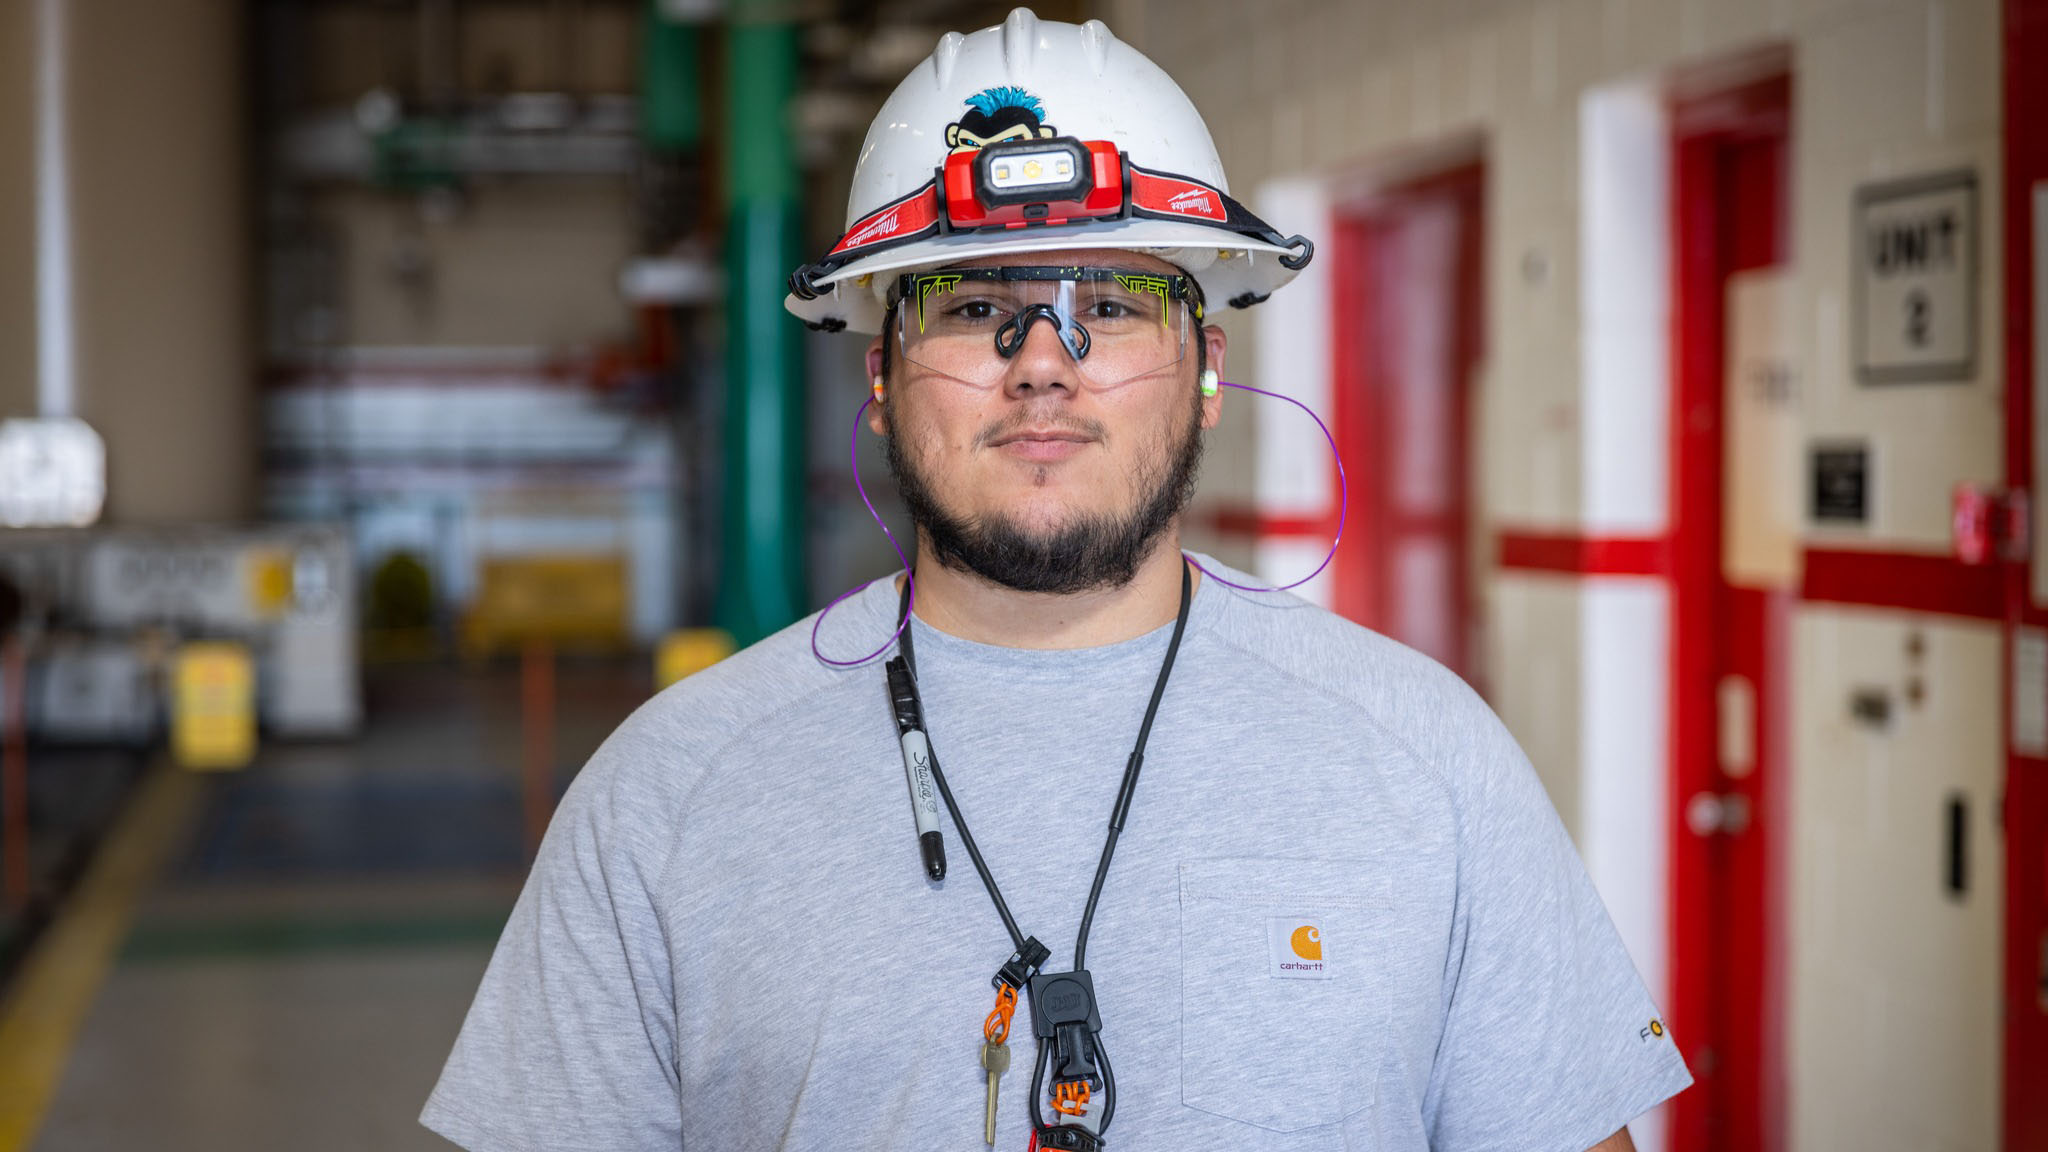 Mason Berry is a journeyman instrumentation and controls technician at Arkansas Nuclear One.